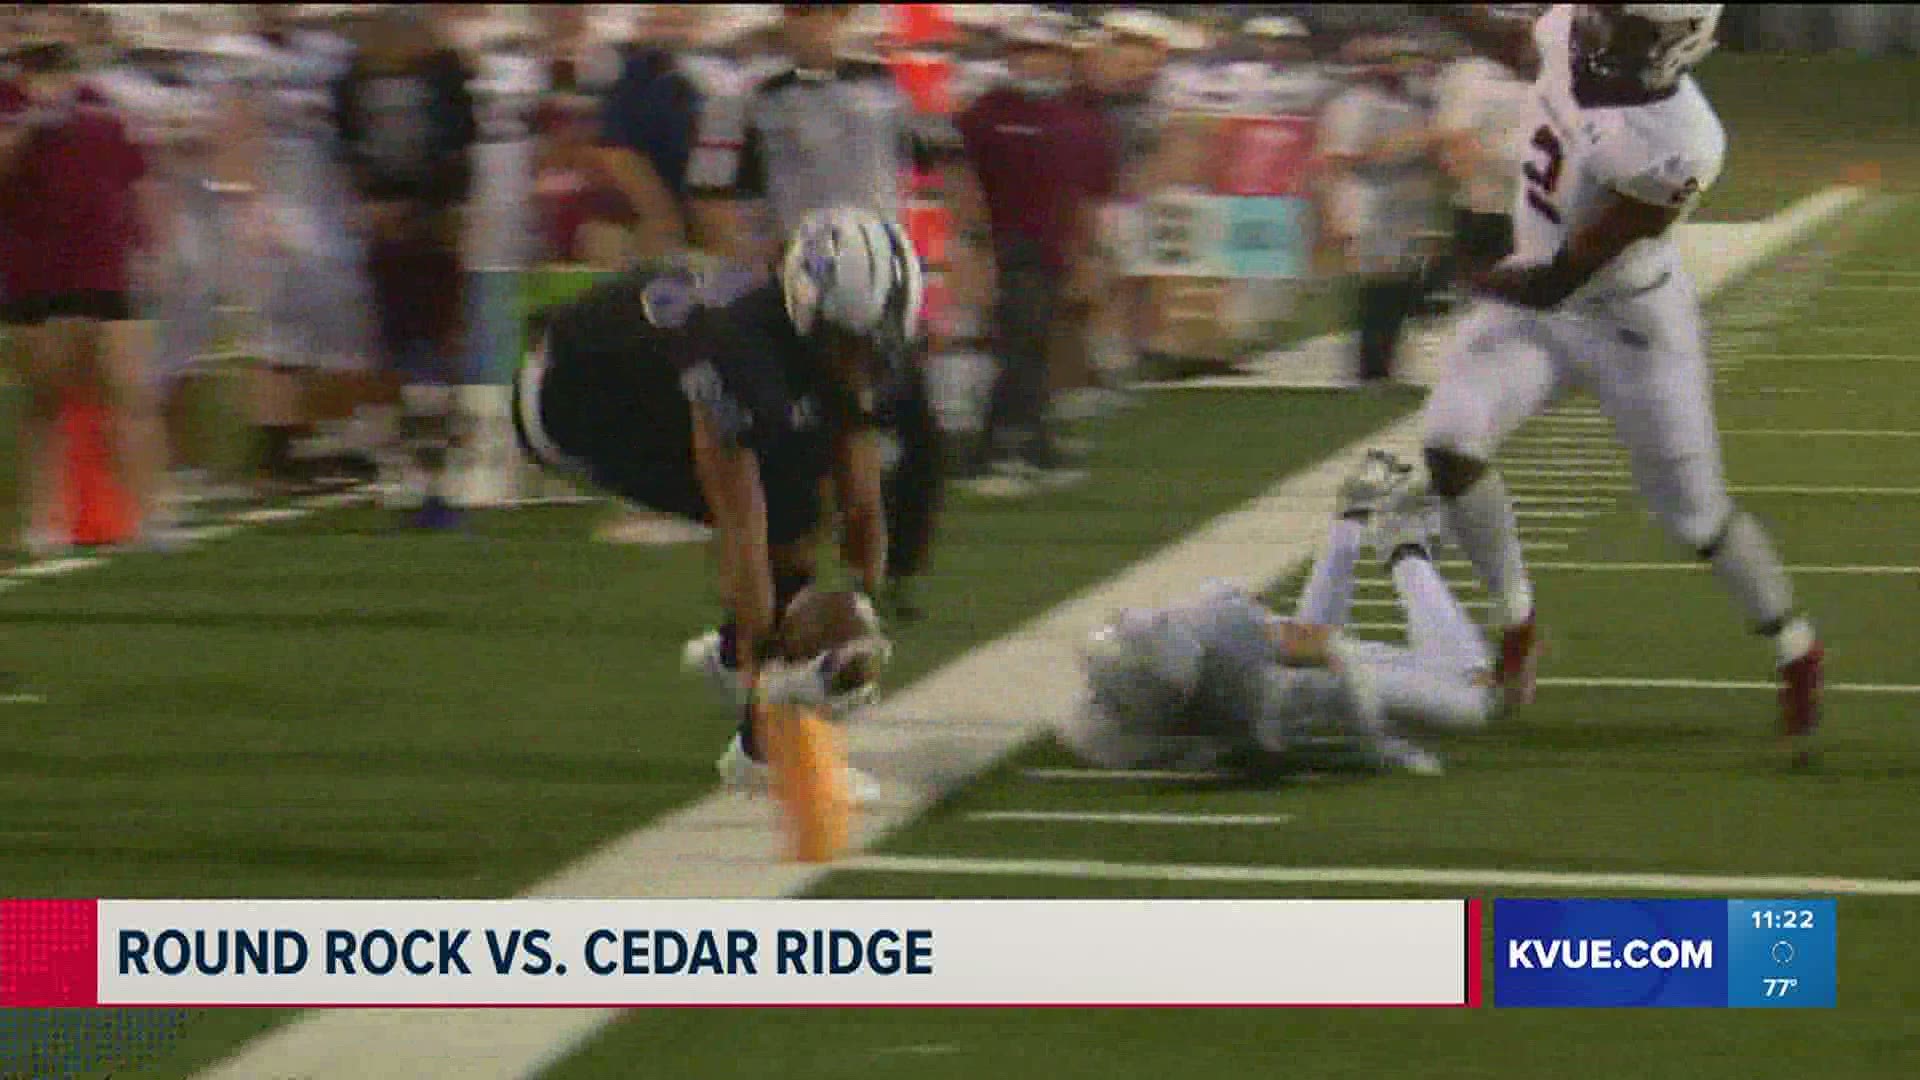 The Cedar Ridge Raiders and Round Rock Dragons matchup is KVUE's Game of the Week!